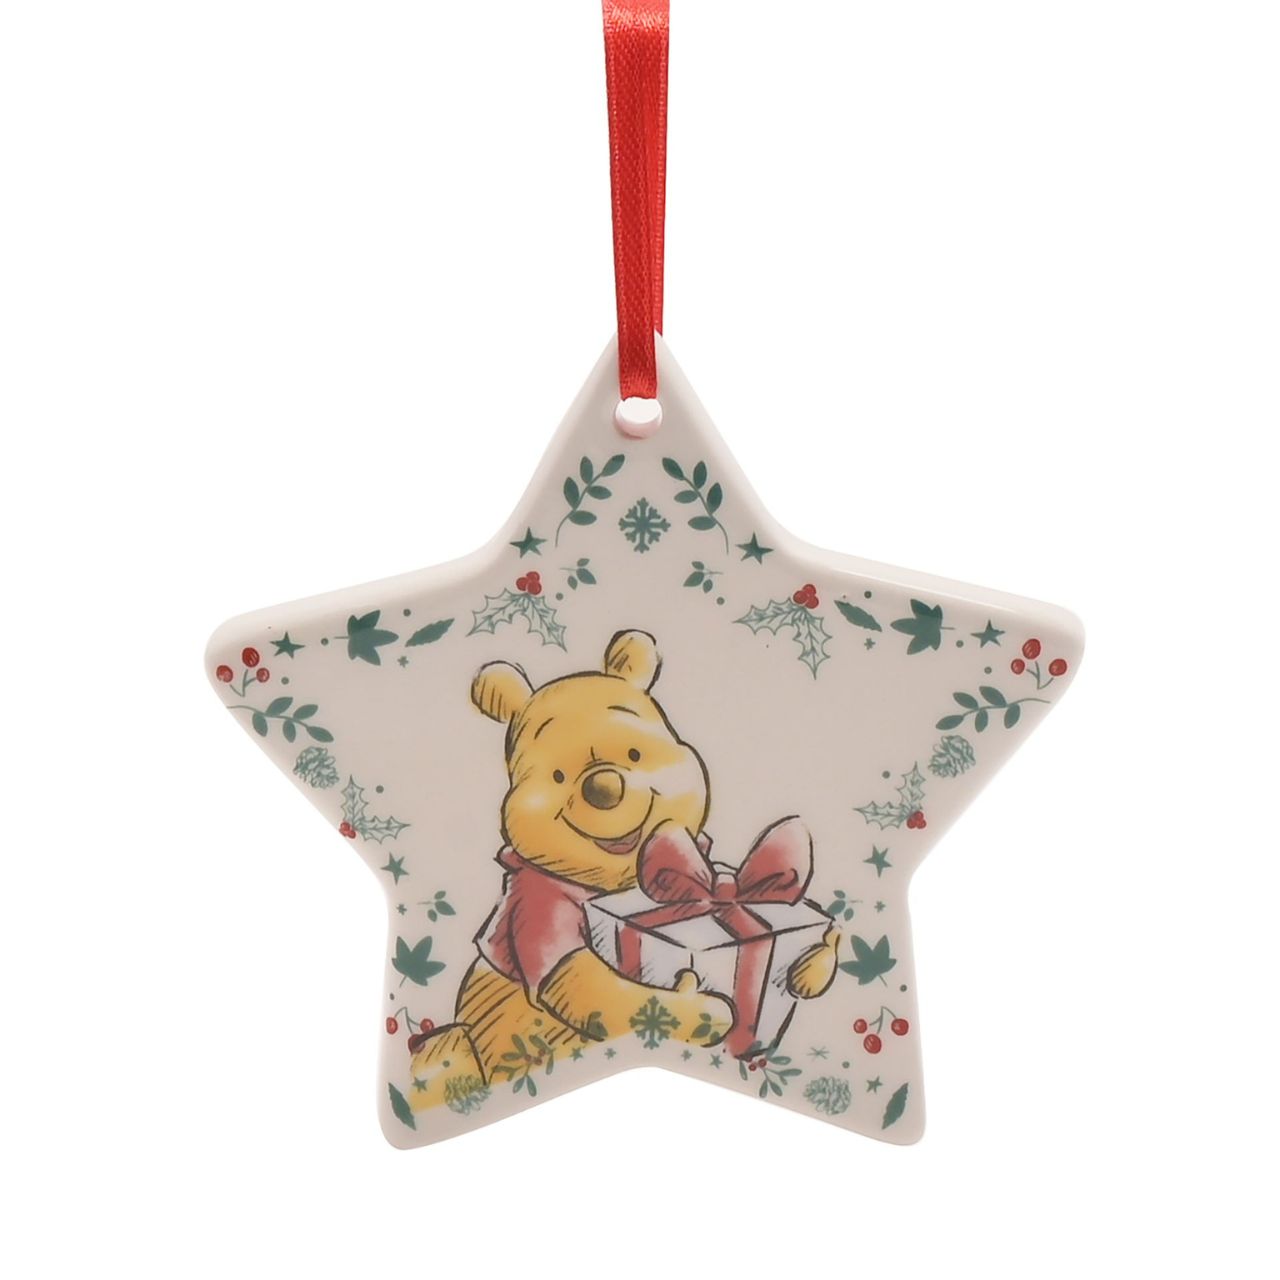 Disney Winnie the Pooh Christmas Decorations Set of 4 Ceramic  A set of 4 Winnie the Pooh ceramic decorations by DISNEY®.  These fun-filled decorations will hang proudly from the Christmas tree throughout December.